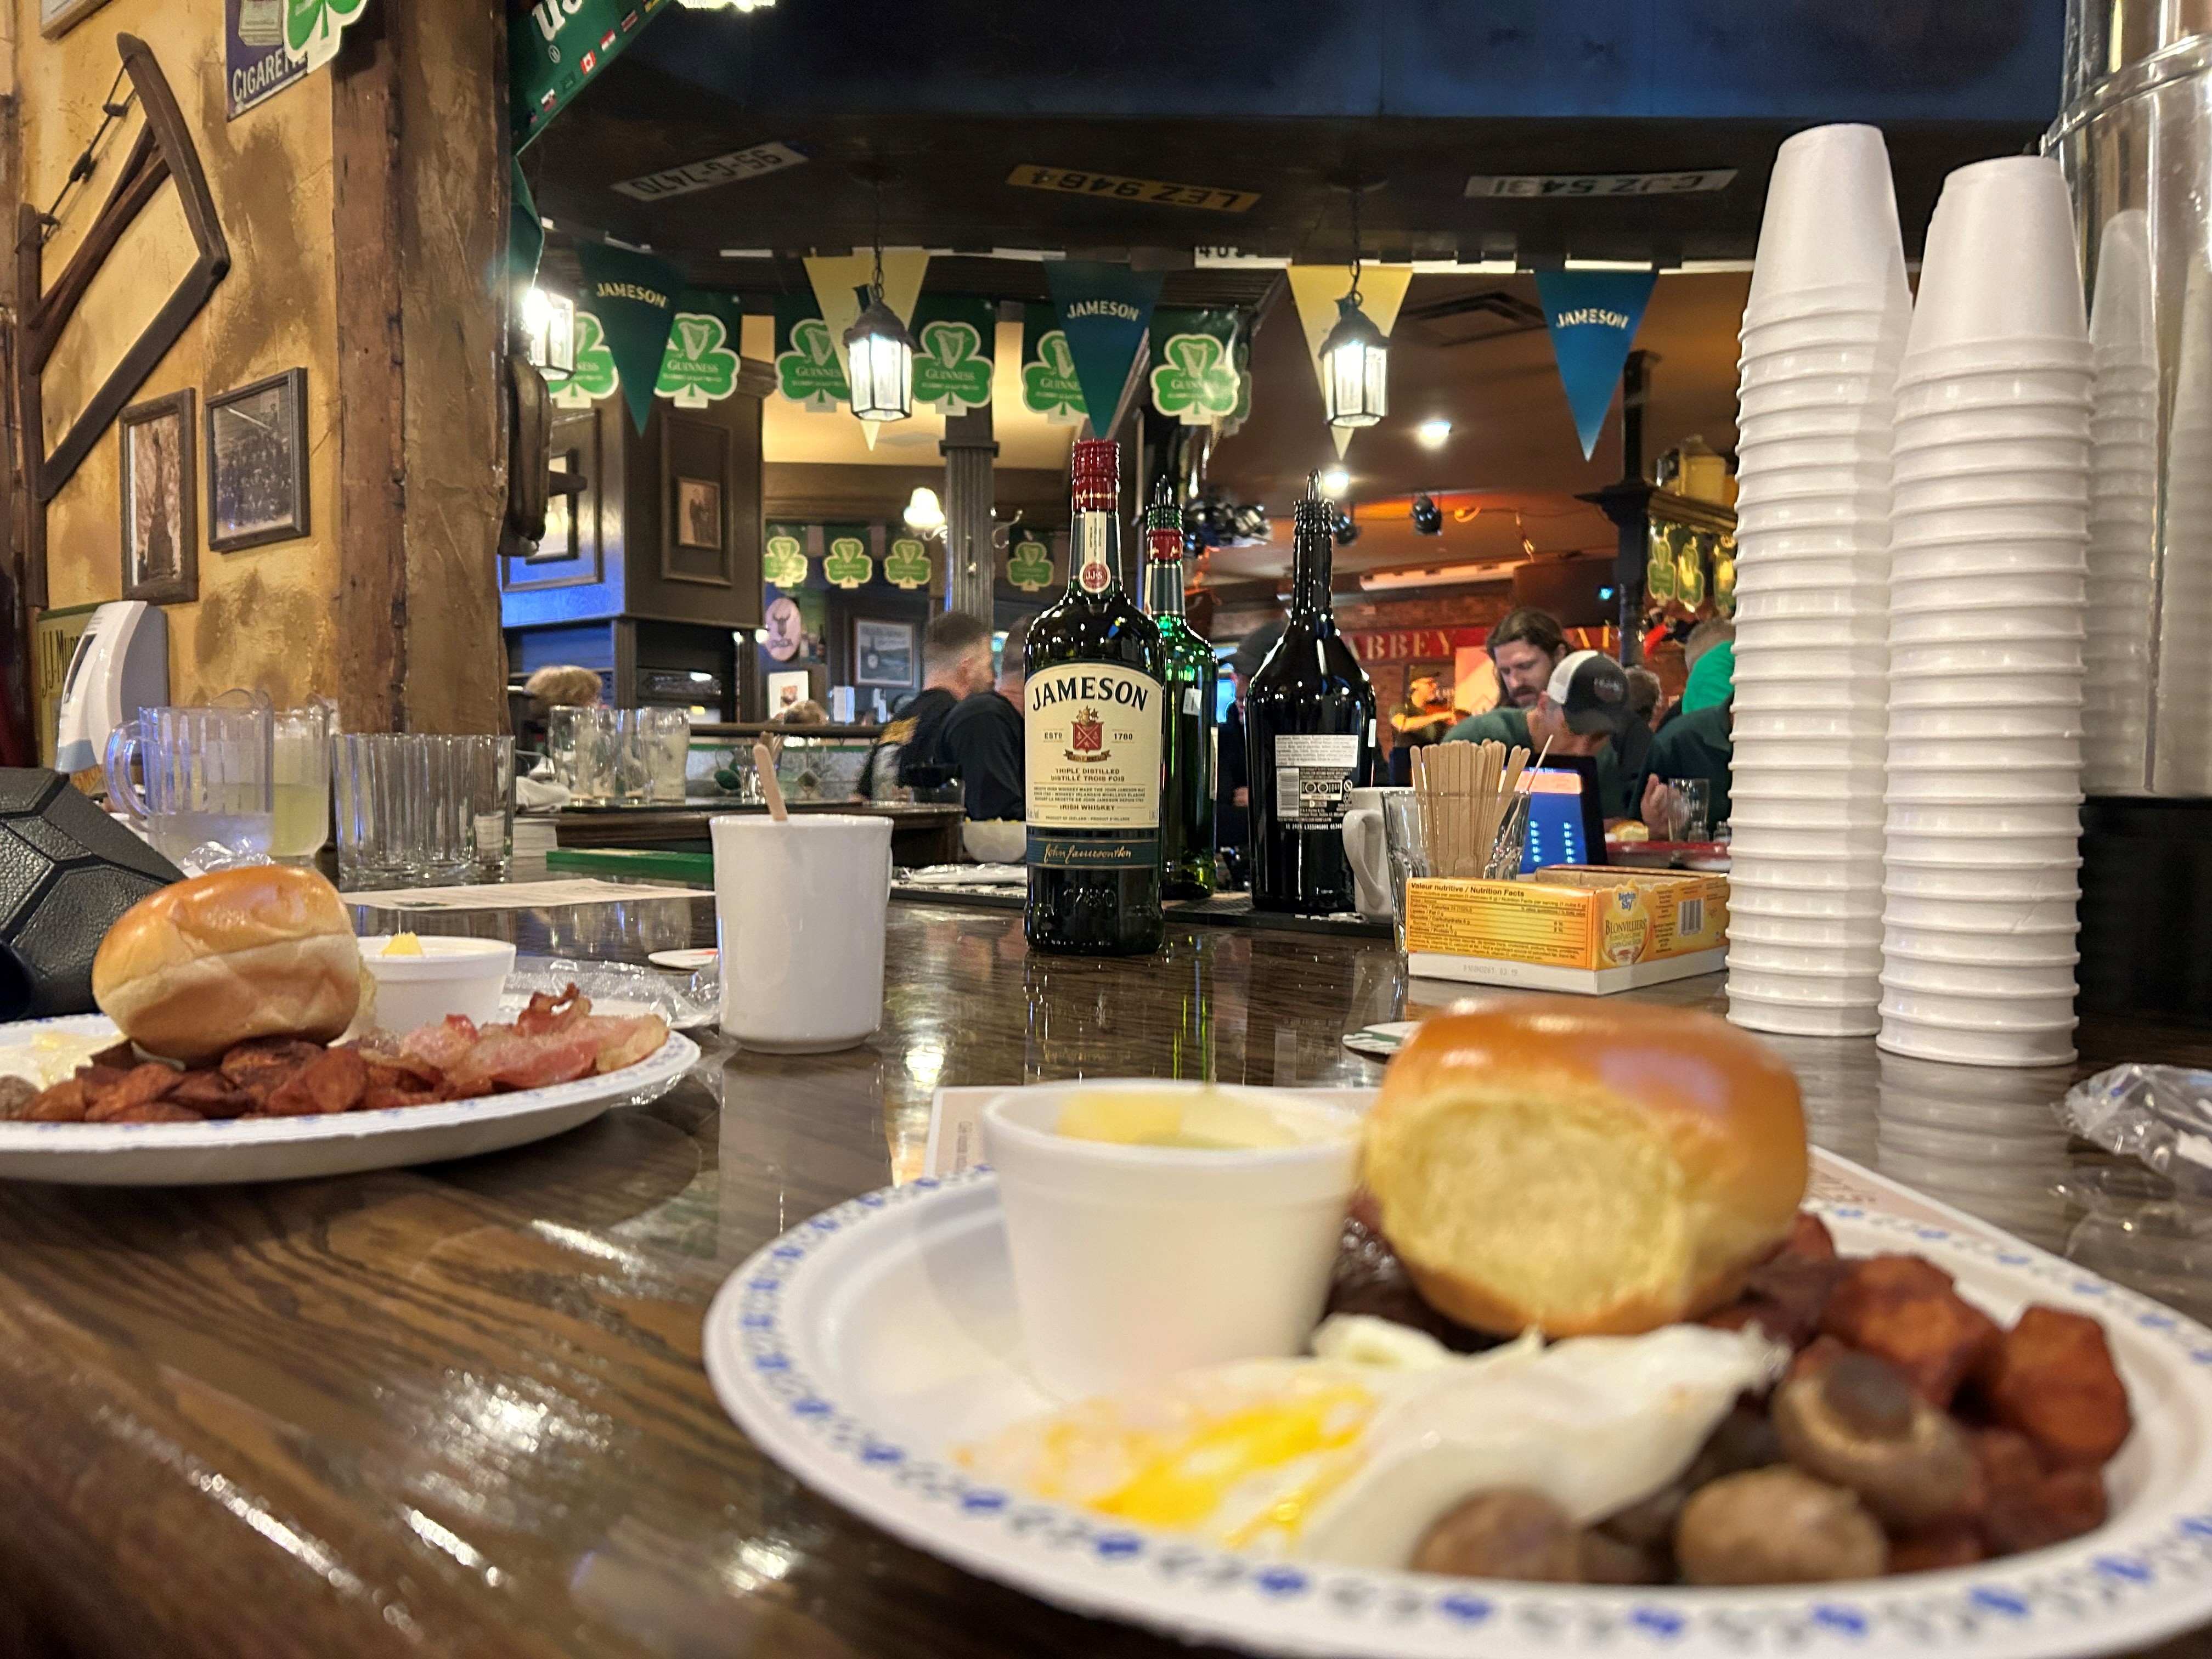 West Island pub packed for St. Paddy’s Day breakfast for a good cause